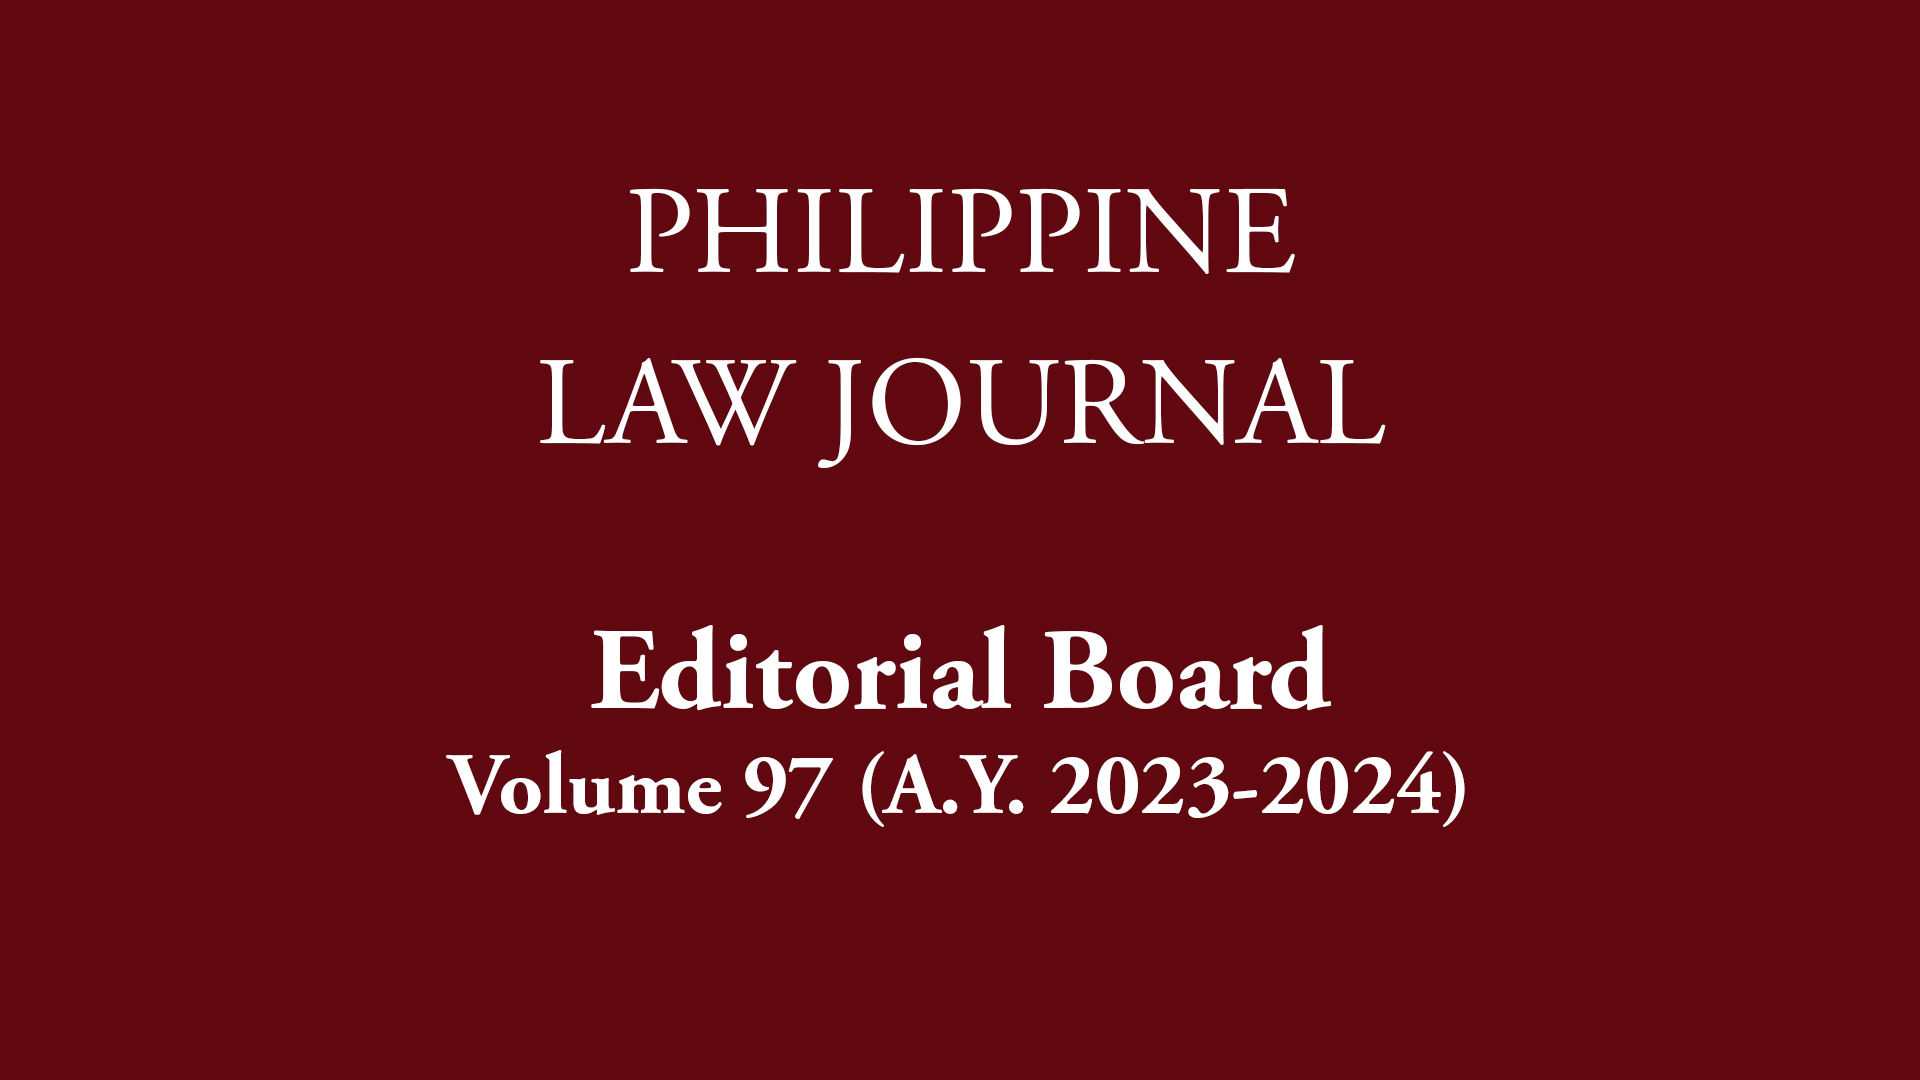 Philippine Law Journal Editorial Board Volume 97 A.Y. 2023-2024